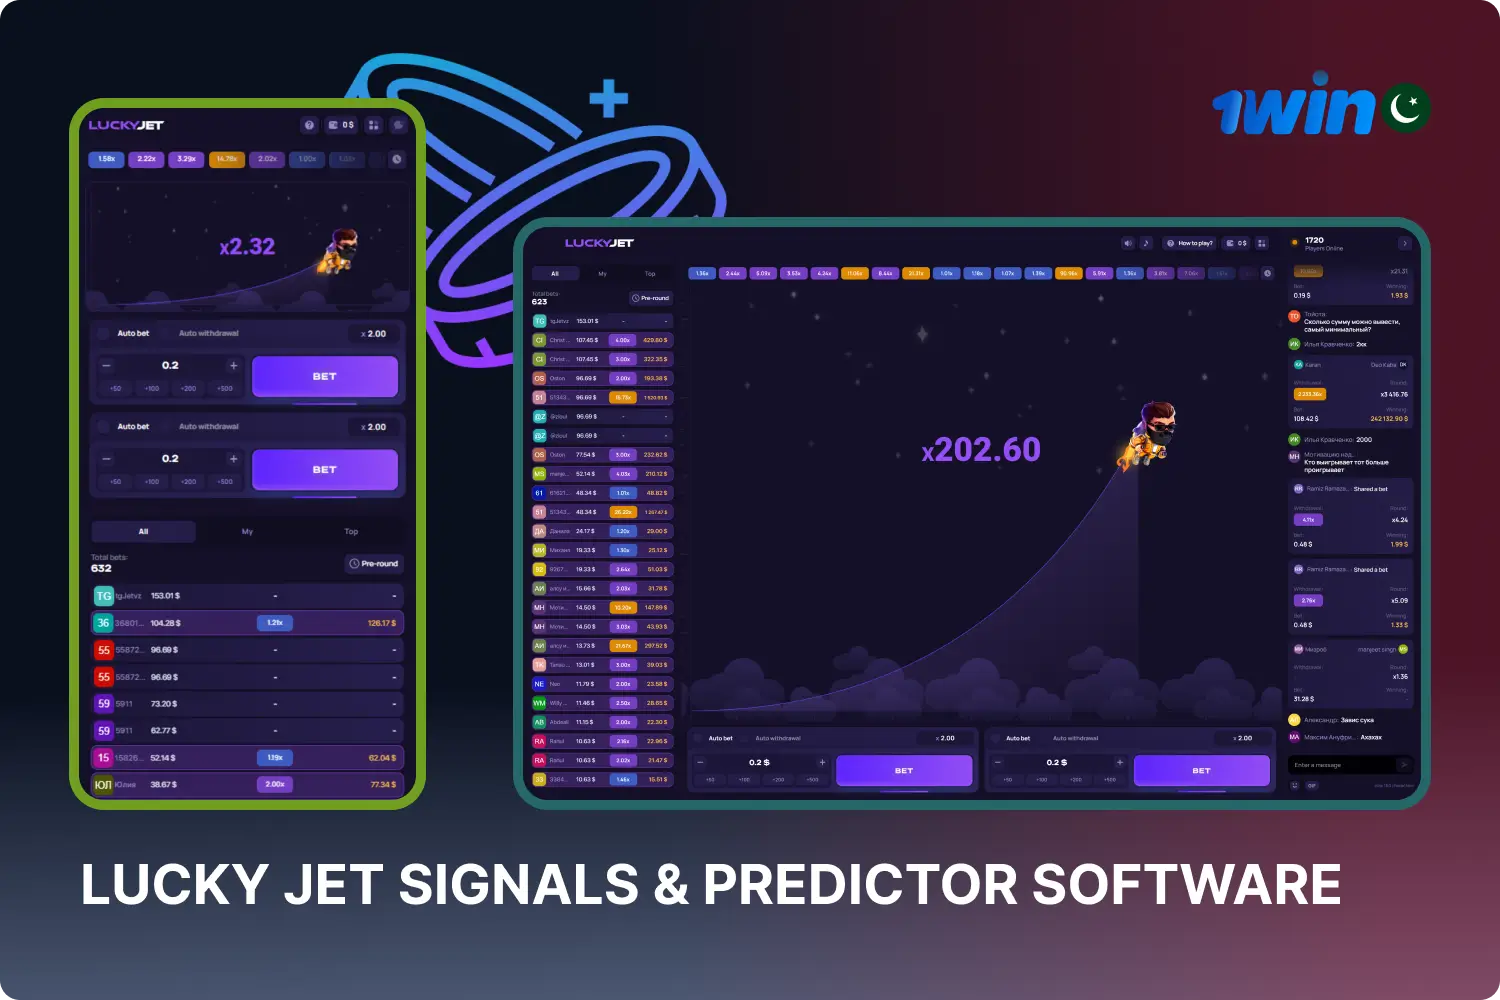 The Lucky Jet game uses Provability Fair technology based on a random number generator, making it impossible to predict the outcome of a round, and making the use of Signals and prediction software pointless and unsafe